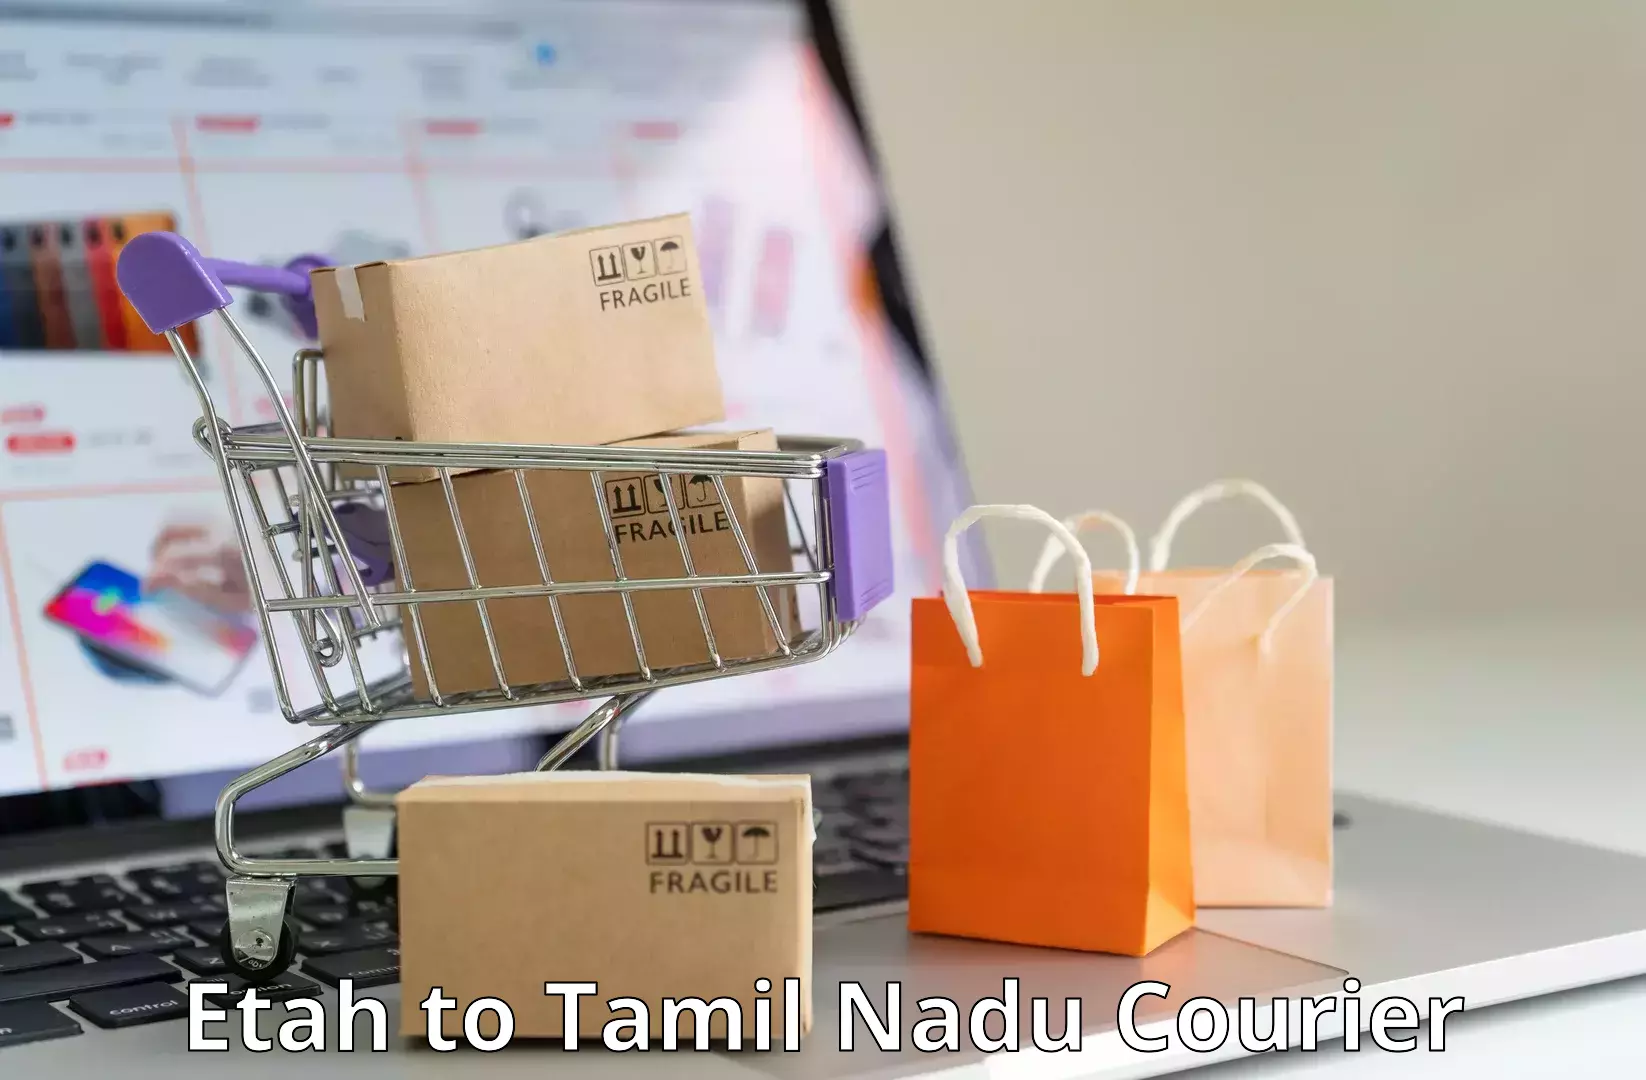 Courier rate comparison Etah to Rajapalayam